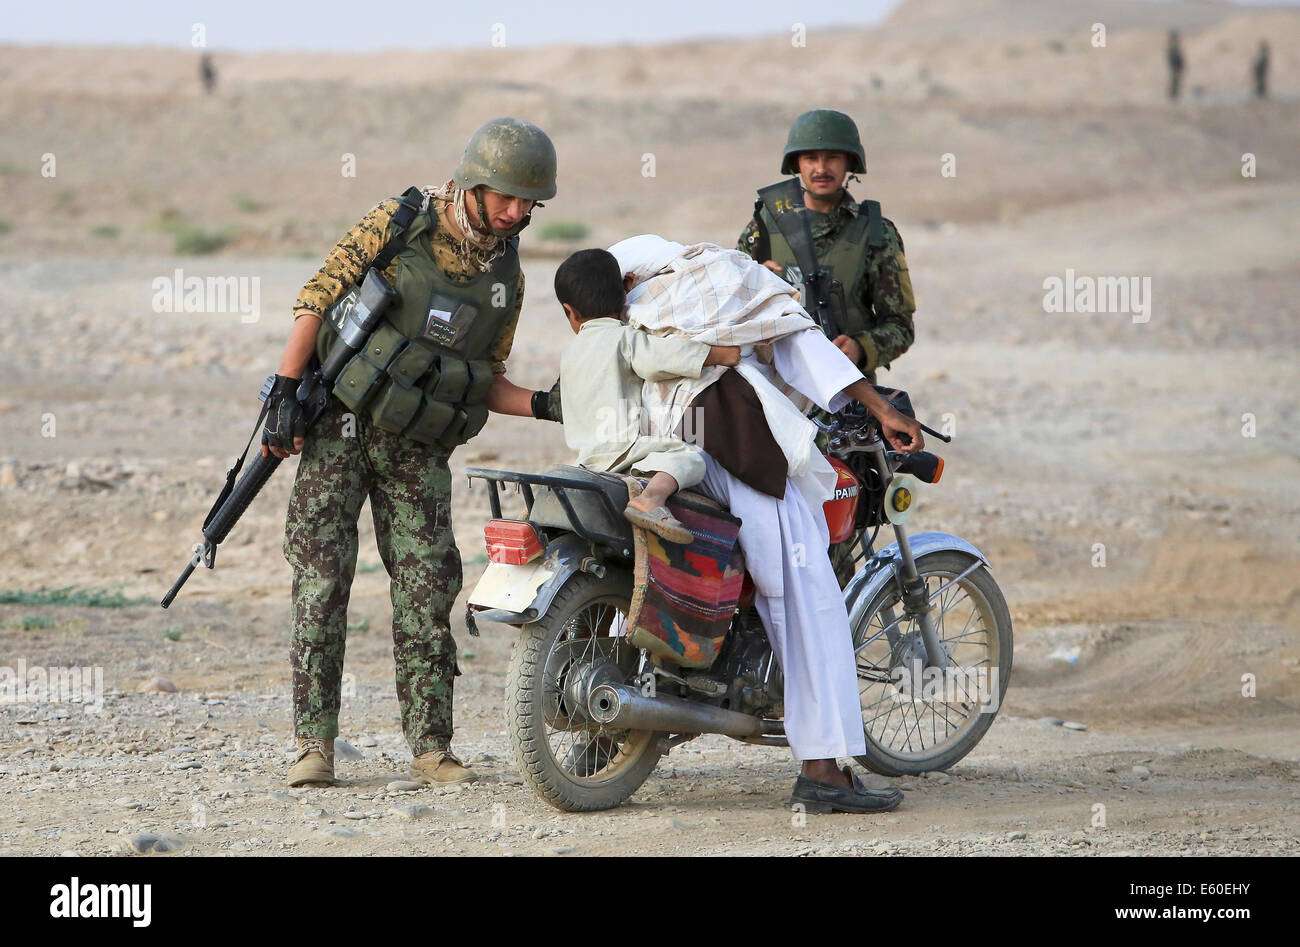 Afghan civilians on a motorcycle are stopped by an Afghan National Army soldier at a vehicle checkpoint July 14, 2014 in the Shekasteh Tappeh village, Helmand province, Afghanistan, July 14, 2014. Stock Photo